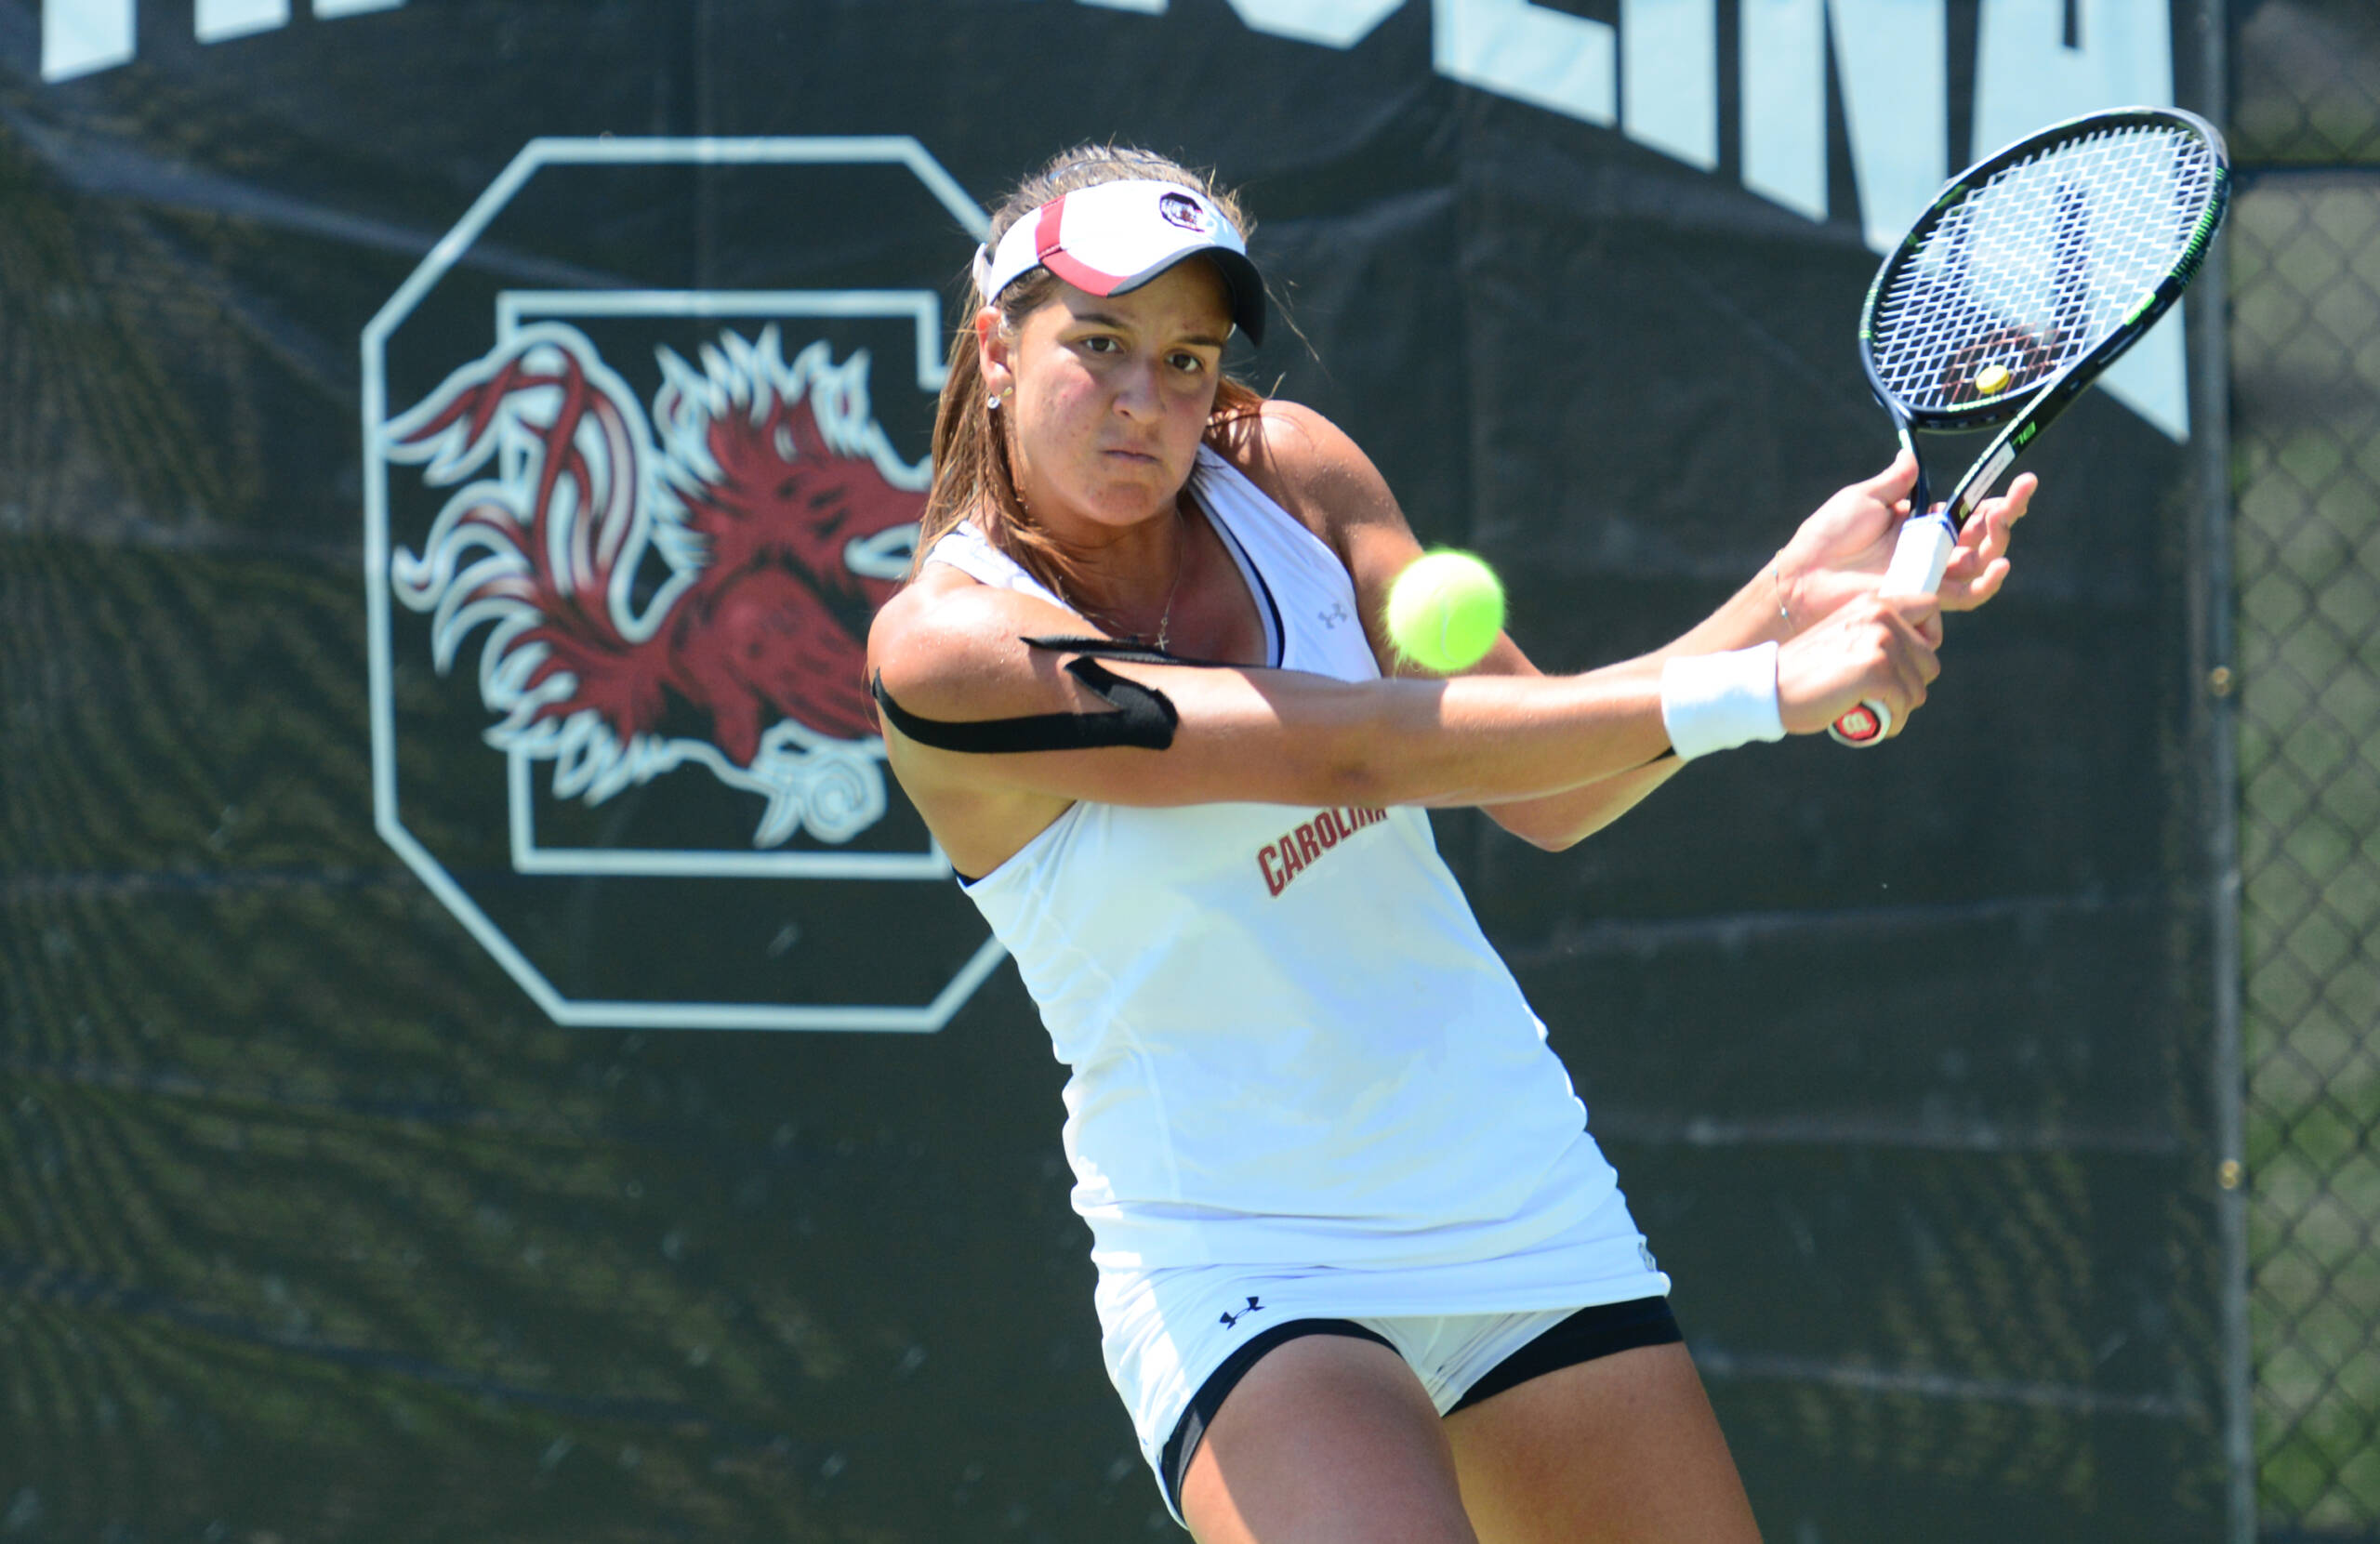 Martins Surges Into Round of 16 at ITA All-American Championships